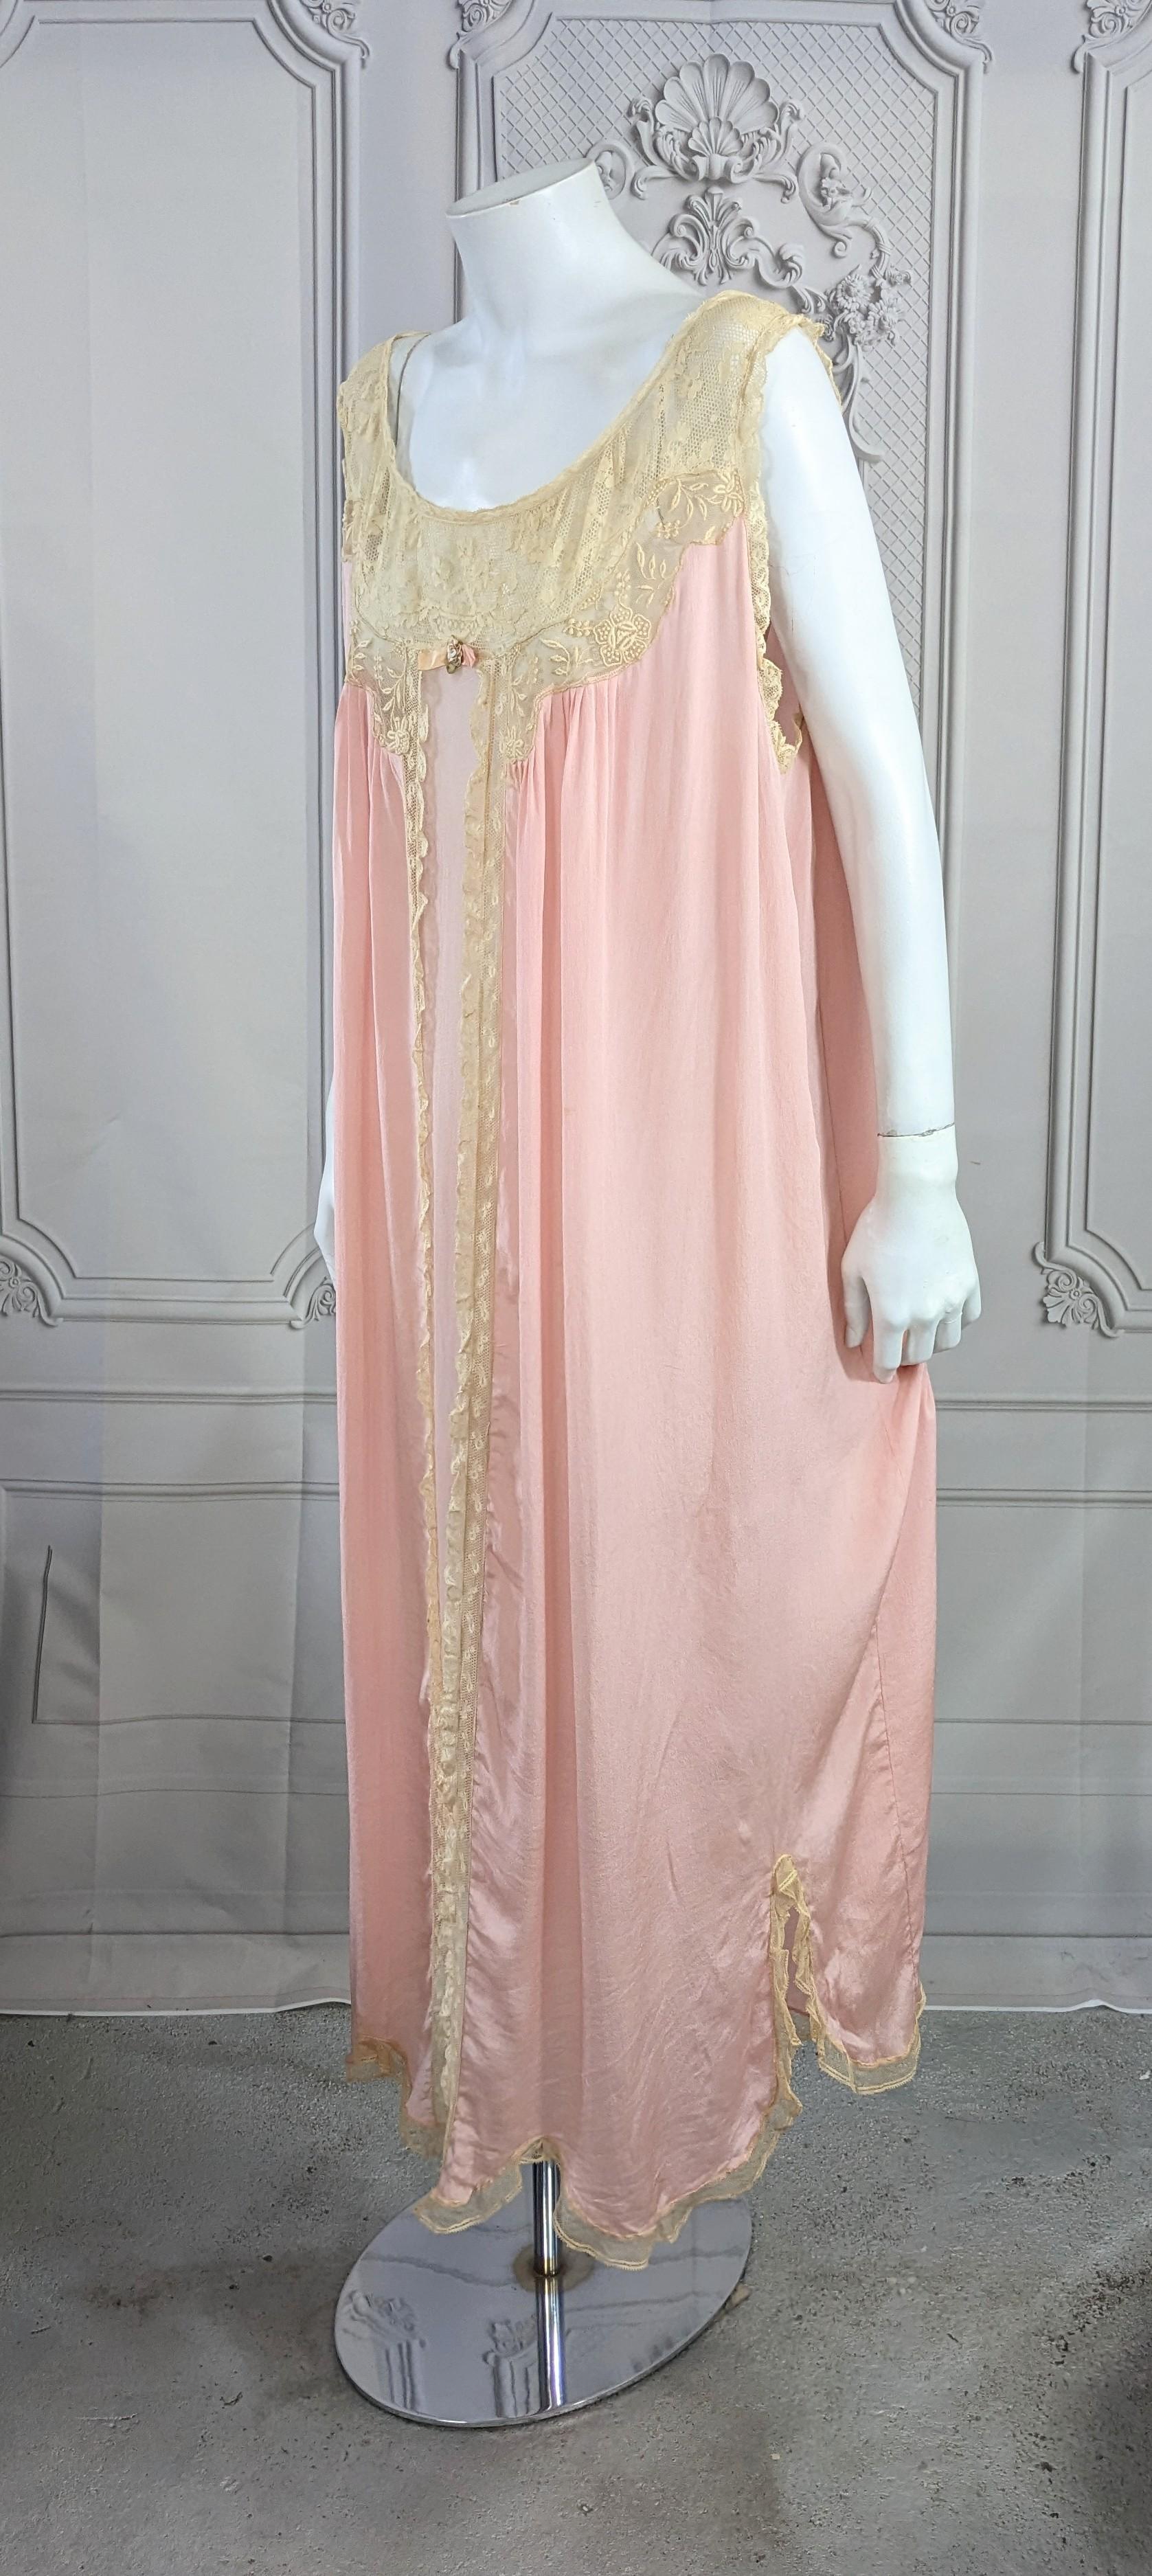 Silk Crepe, Chiffon and Lace Gown, I. Magnin 1